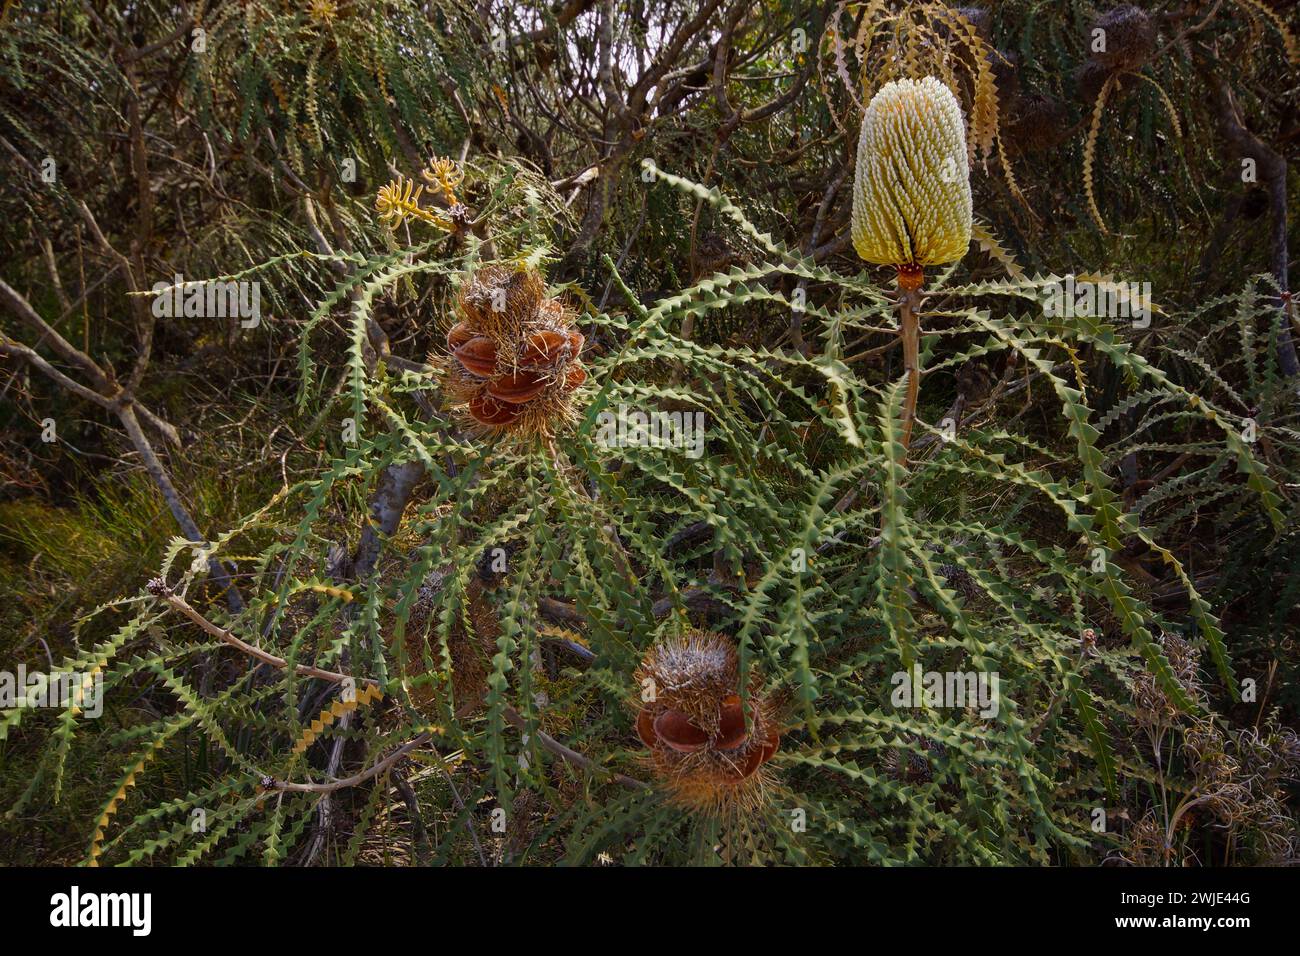 Showy banksia plant with flower spikes (Banksia speciosa) in natural habitat, Western Australia Stock Photo